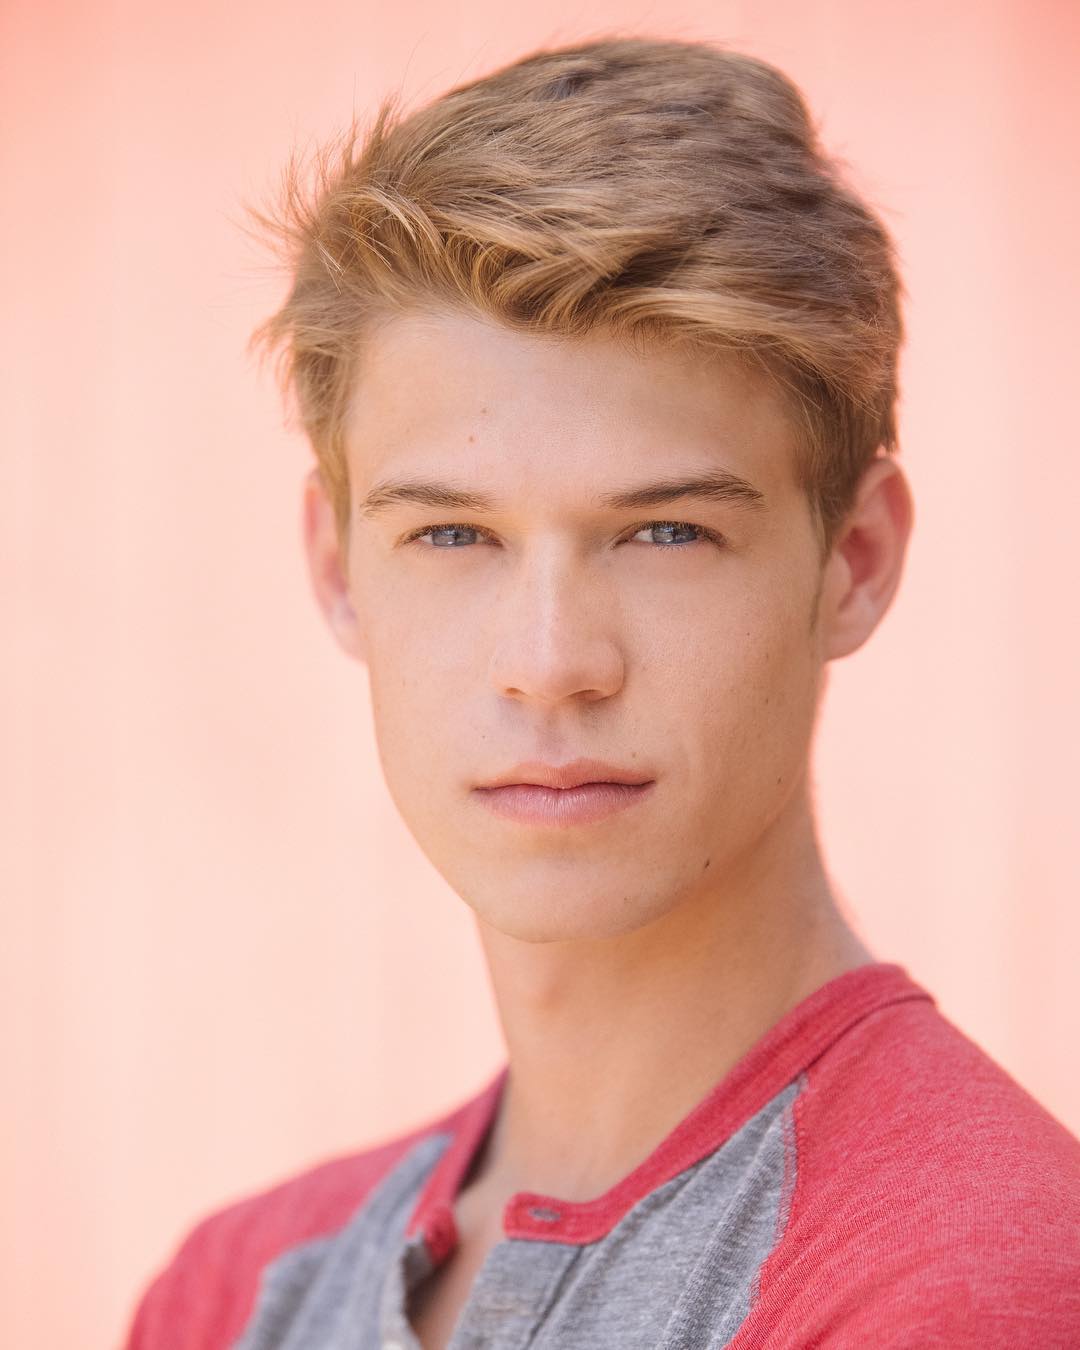 General photo of Colin Ford